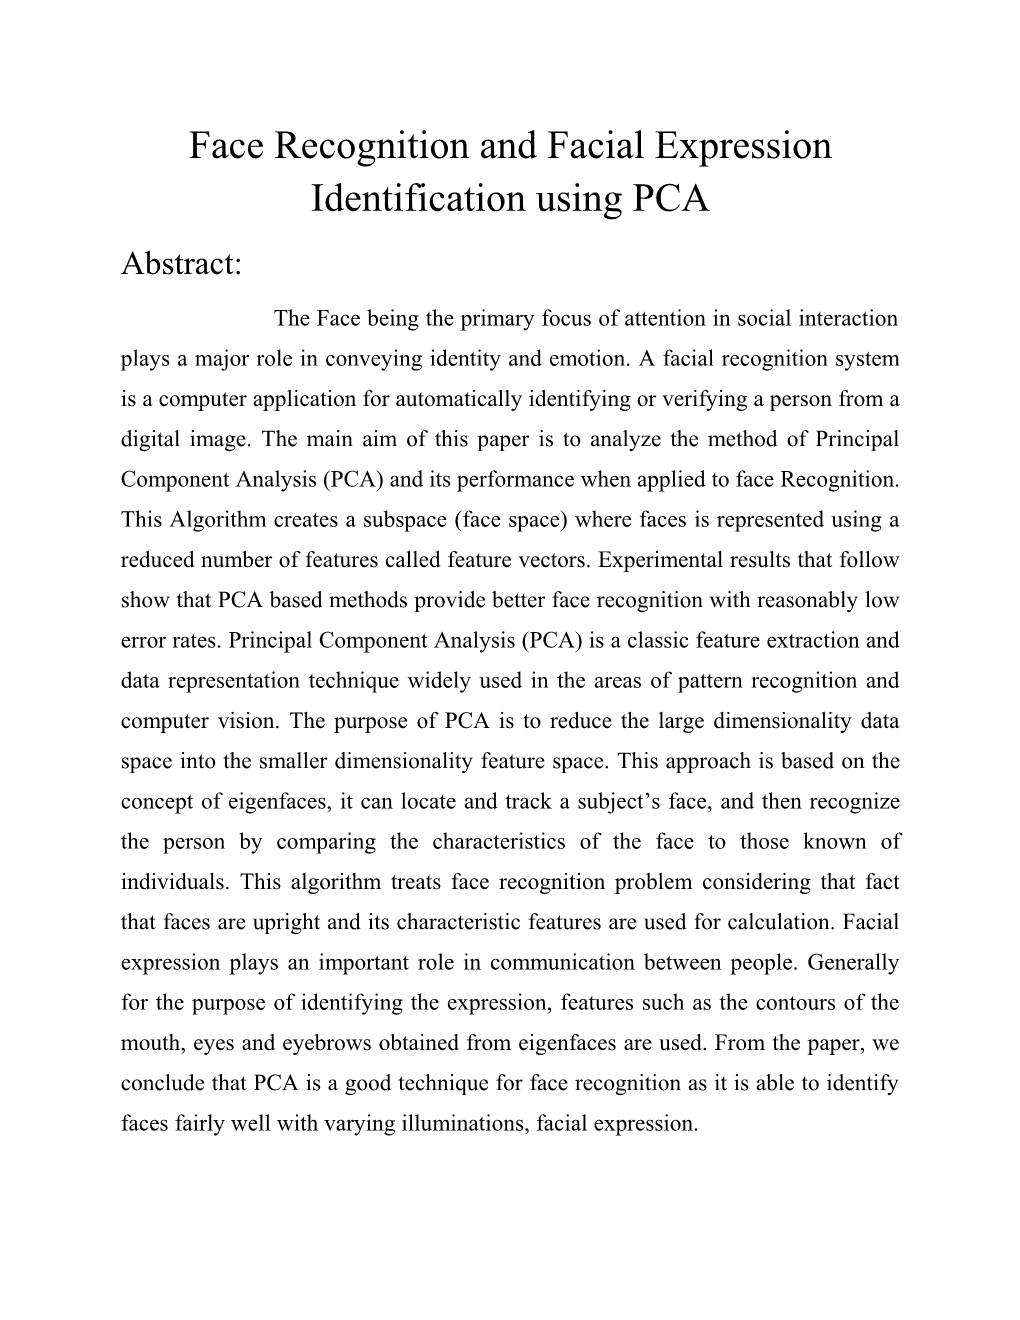 Face Recognition and Facial Expression Identification Using PCA